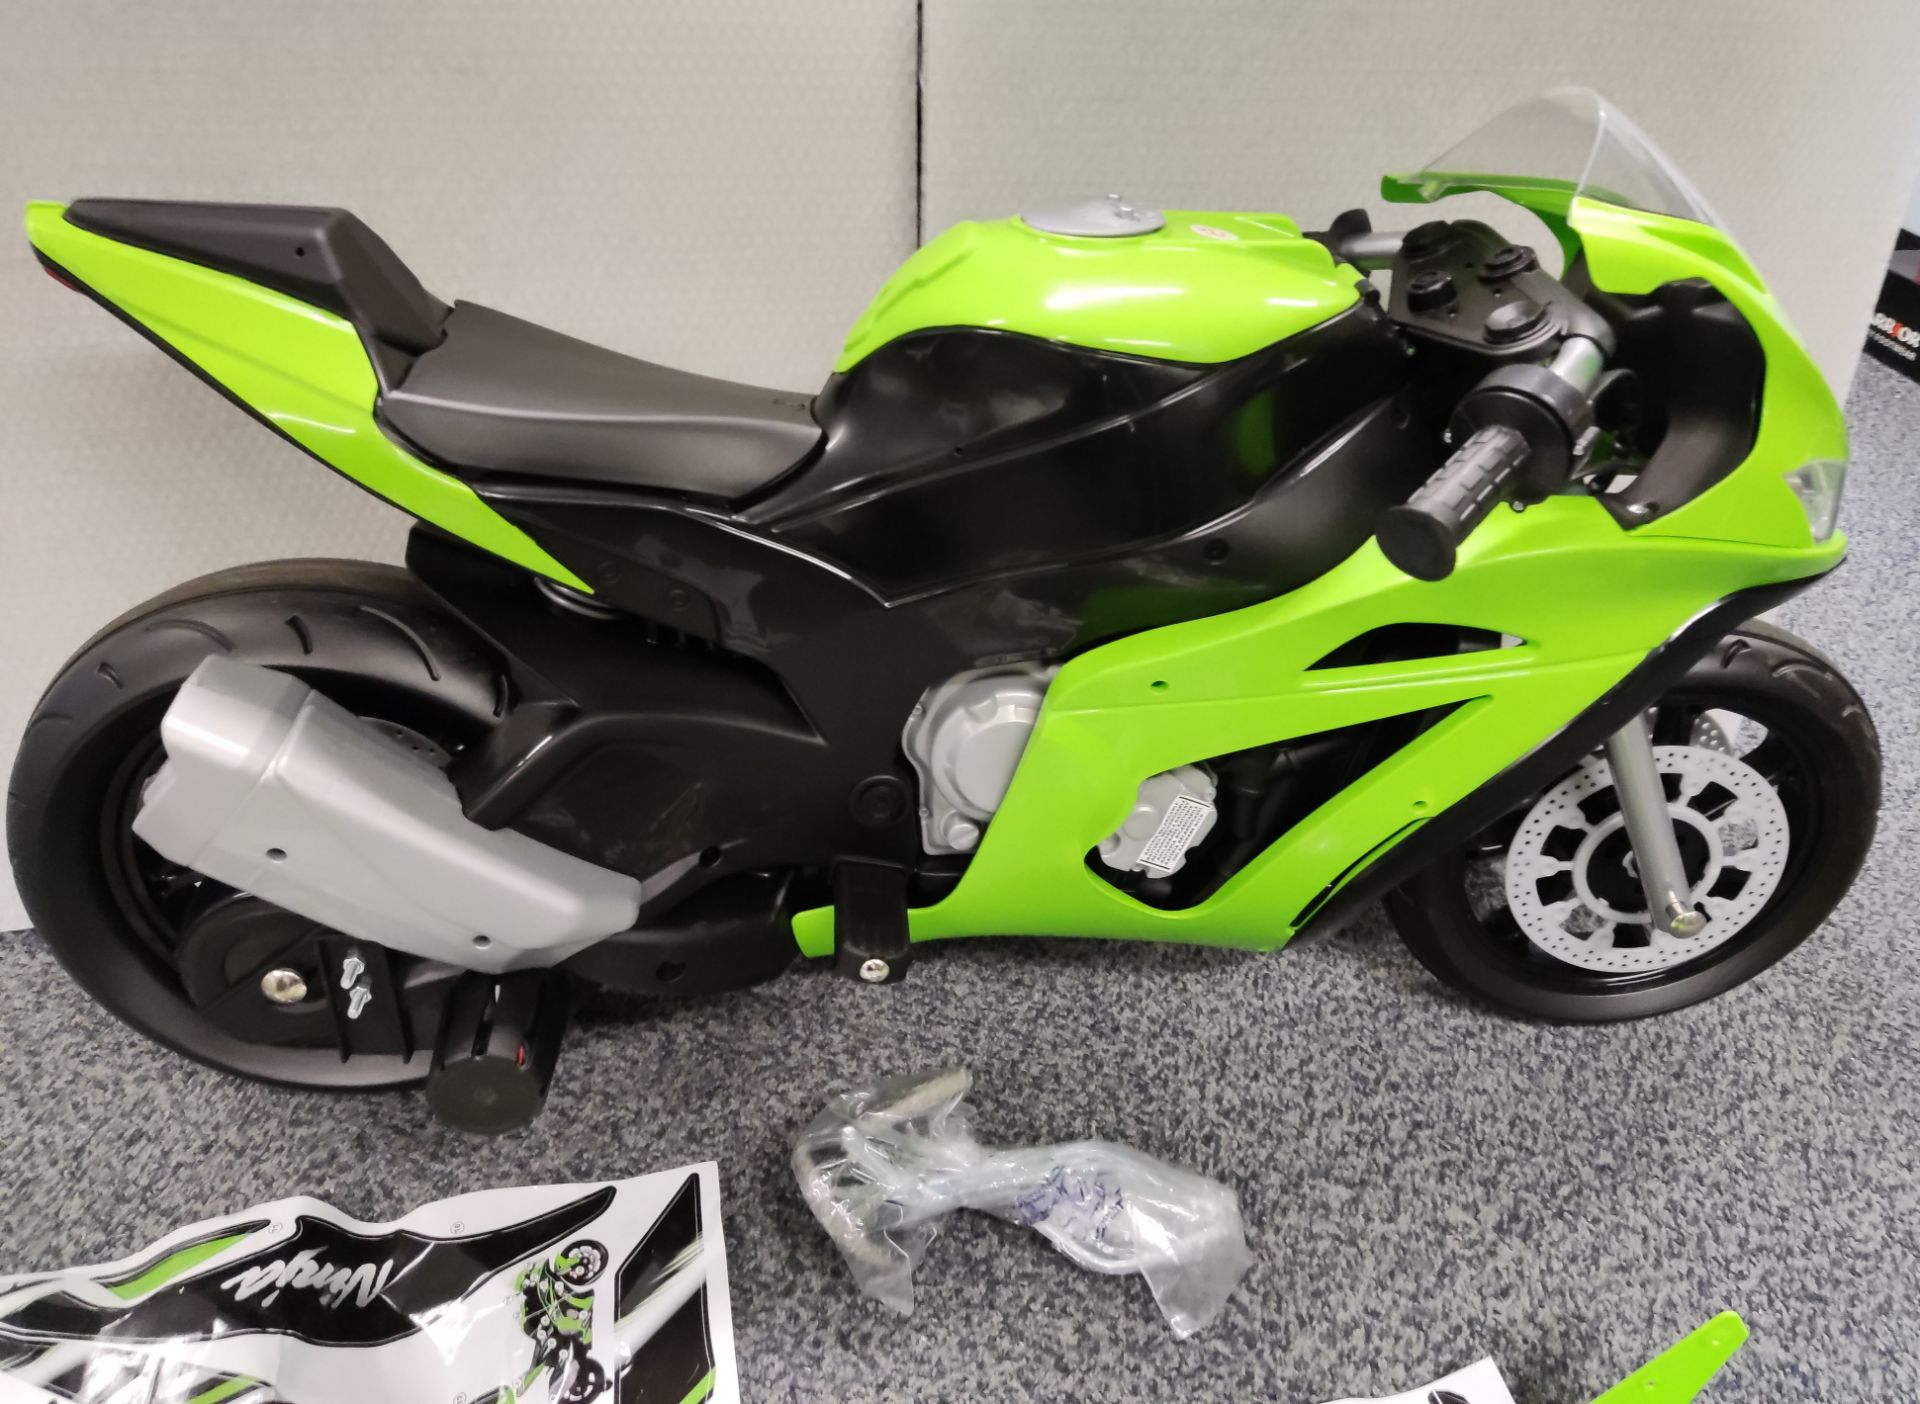 1 x Injusa Kids Electric Ride On Kawasaki ZX10 12V Motorcycle - 6495 - HTYS174 - CL987 - Location: - Image 15 of 24